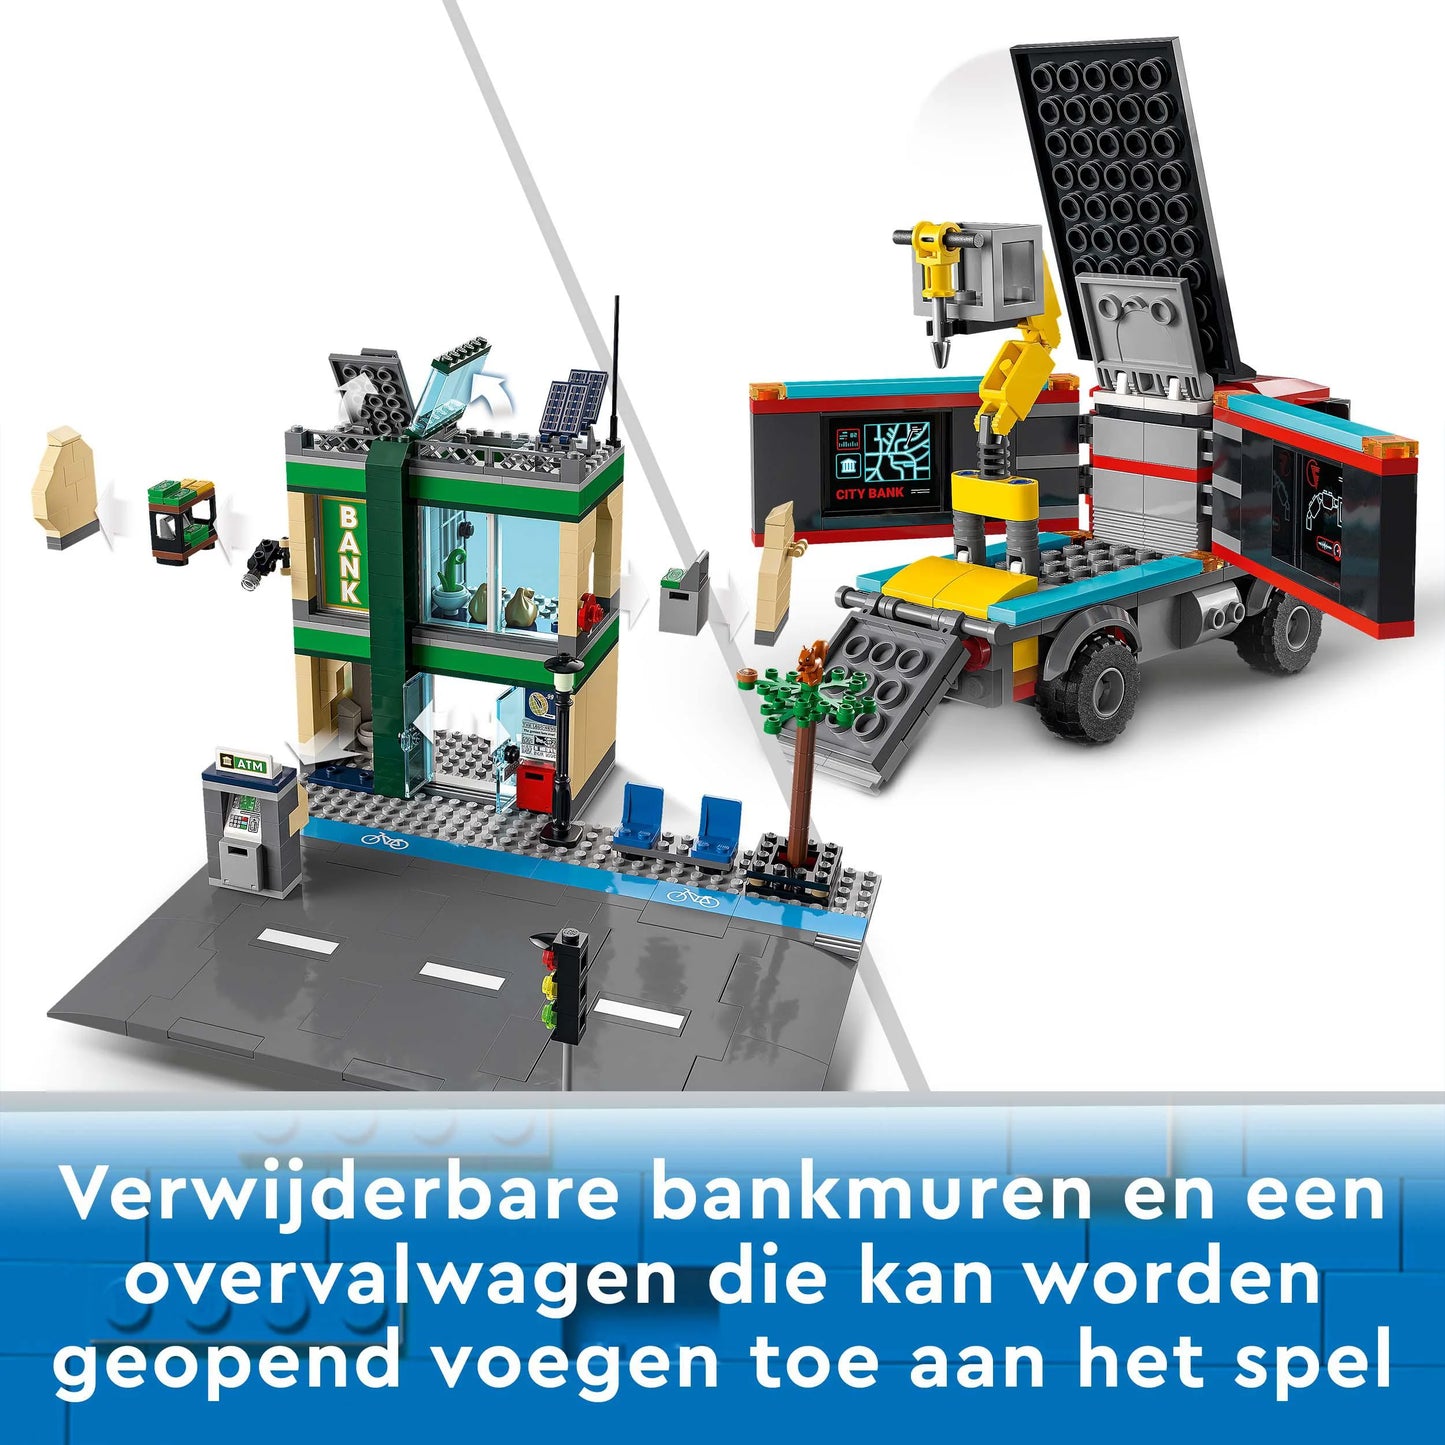 Police chase at the bank-LEGO City